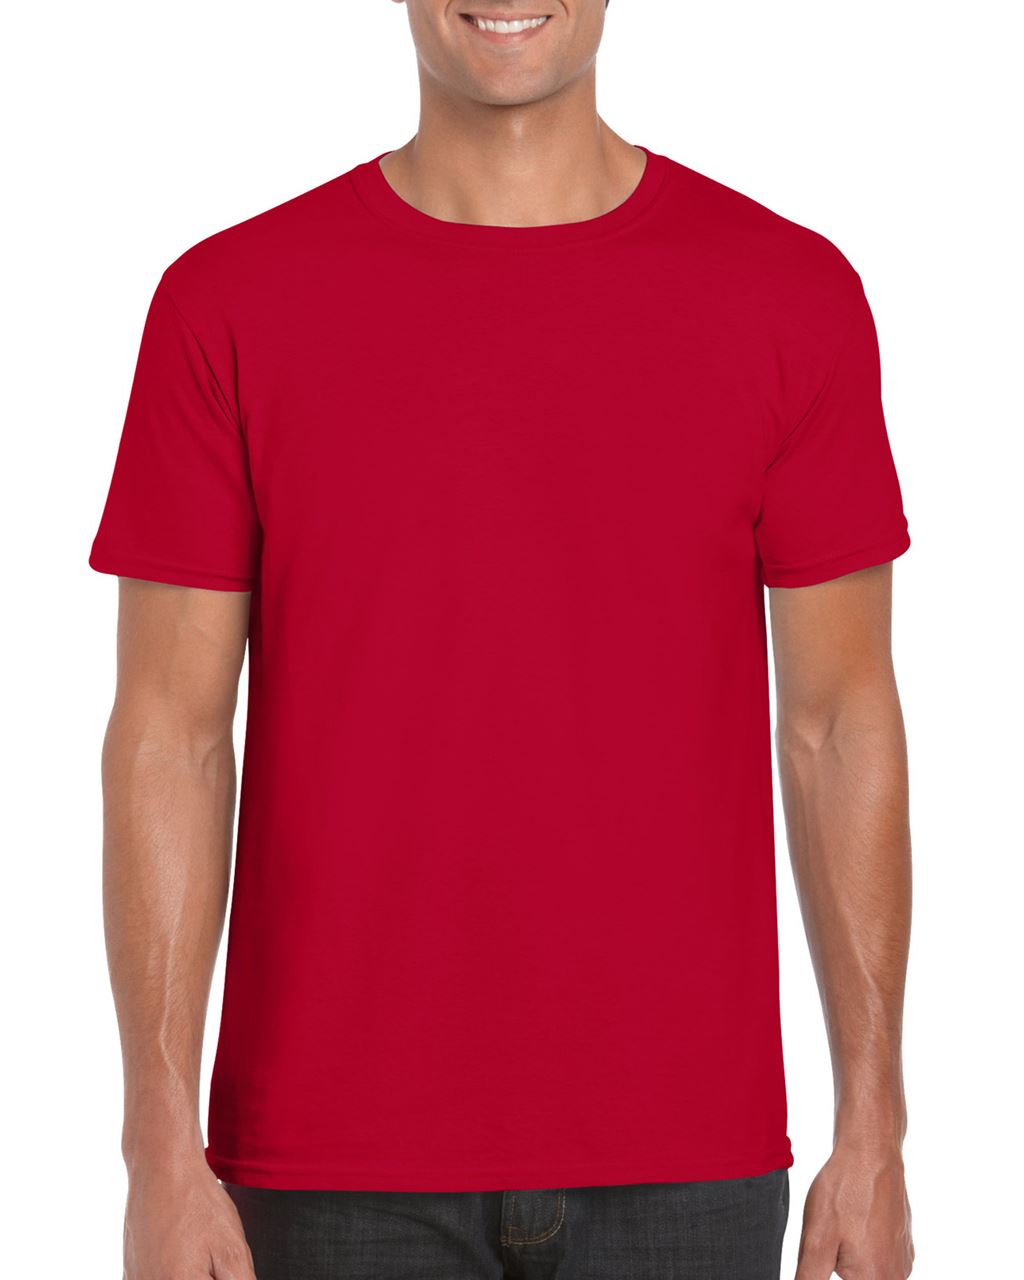 Gildan Softstyle® Adult T-shirt - red